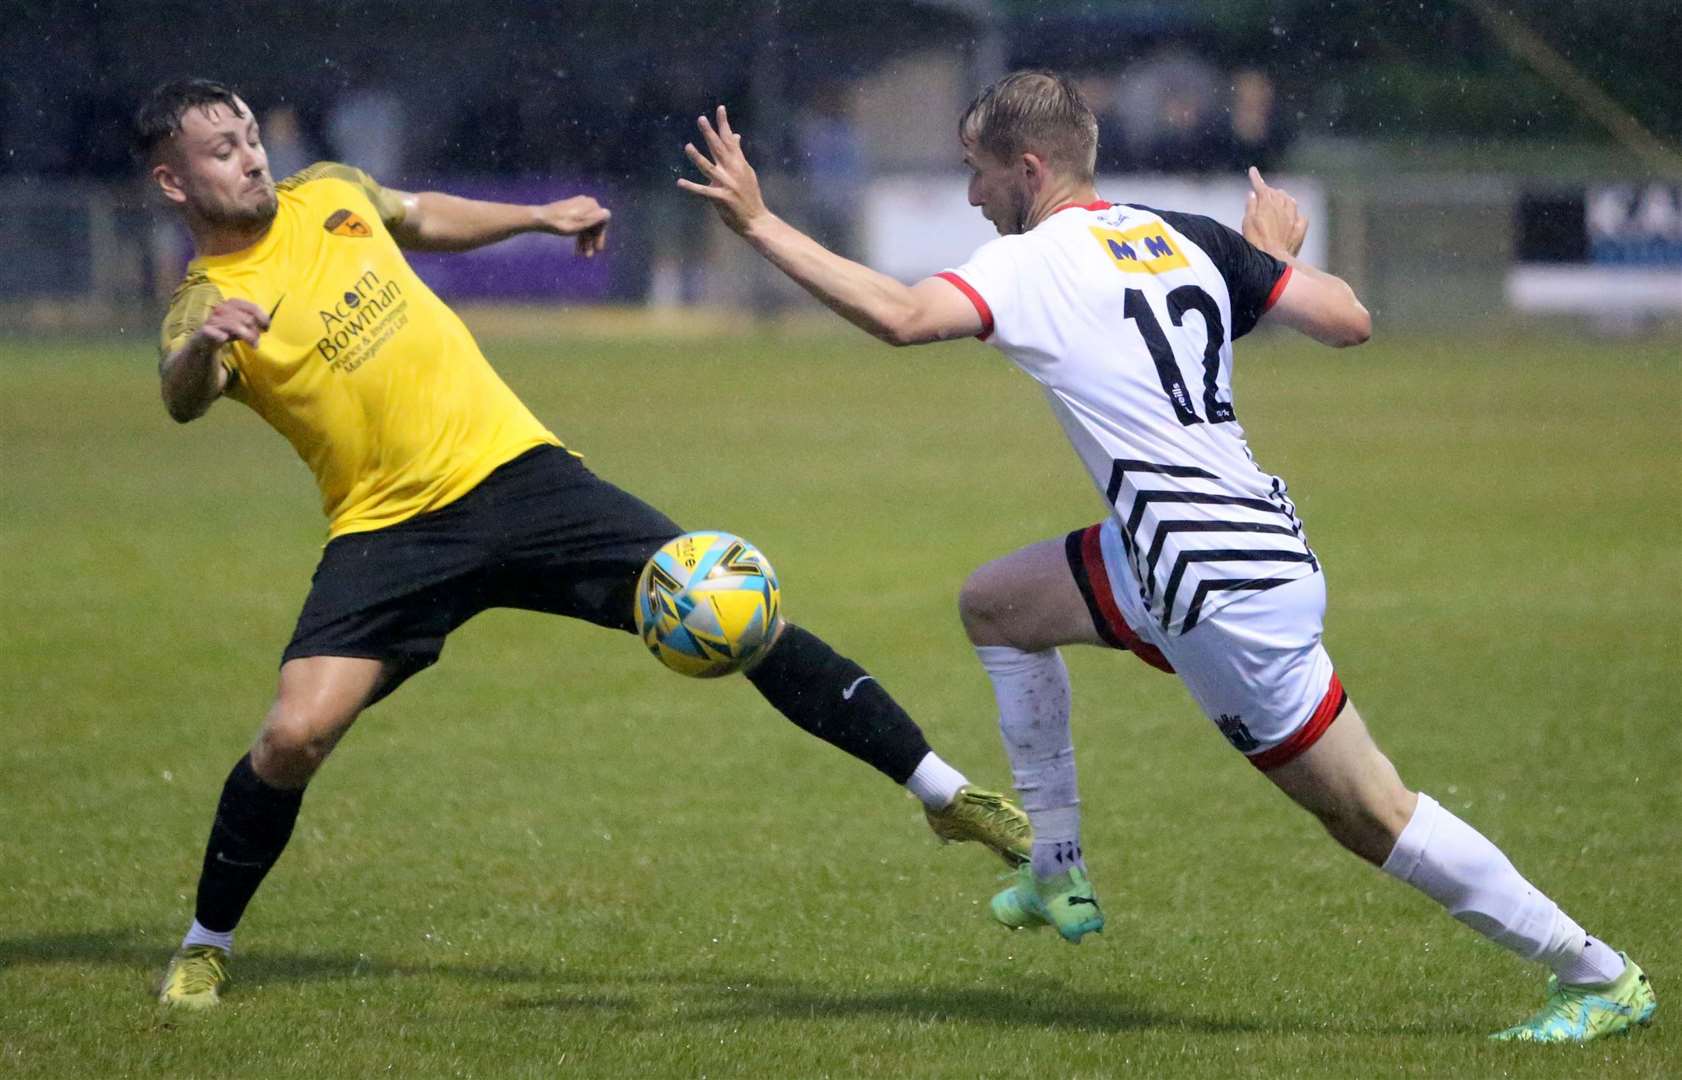 Midfielder Macauley Murray in action for Deal against Minster. Picture: Paul Willmott